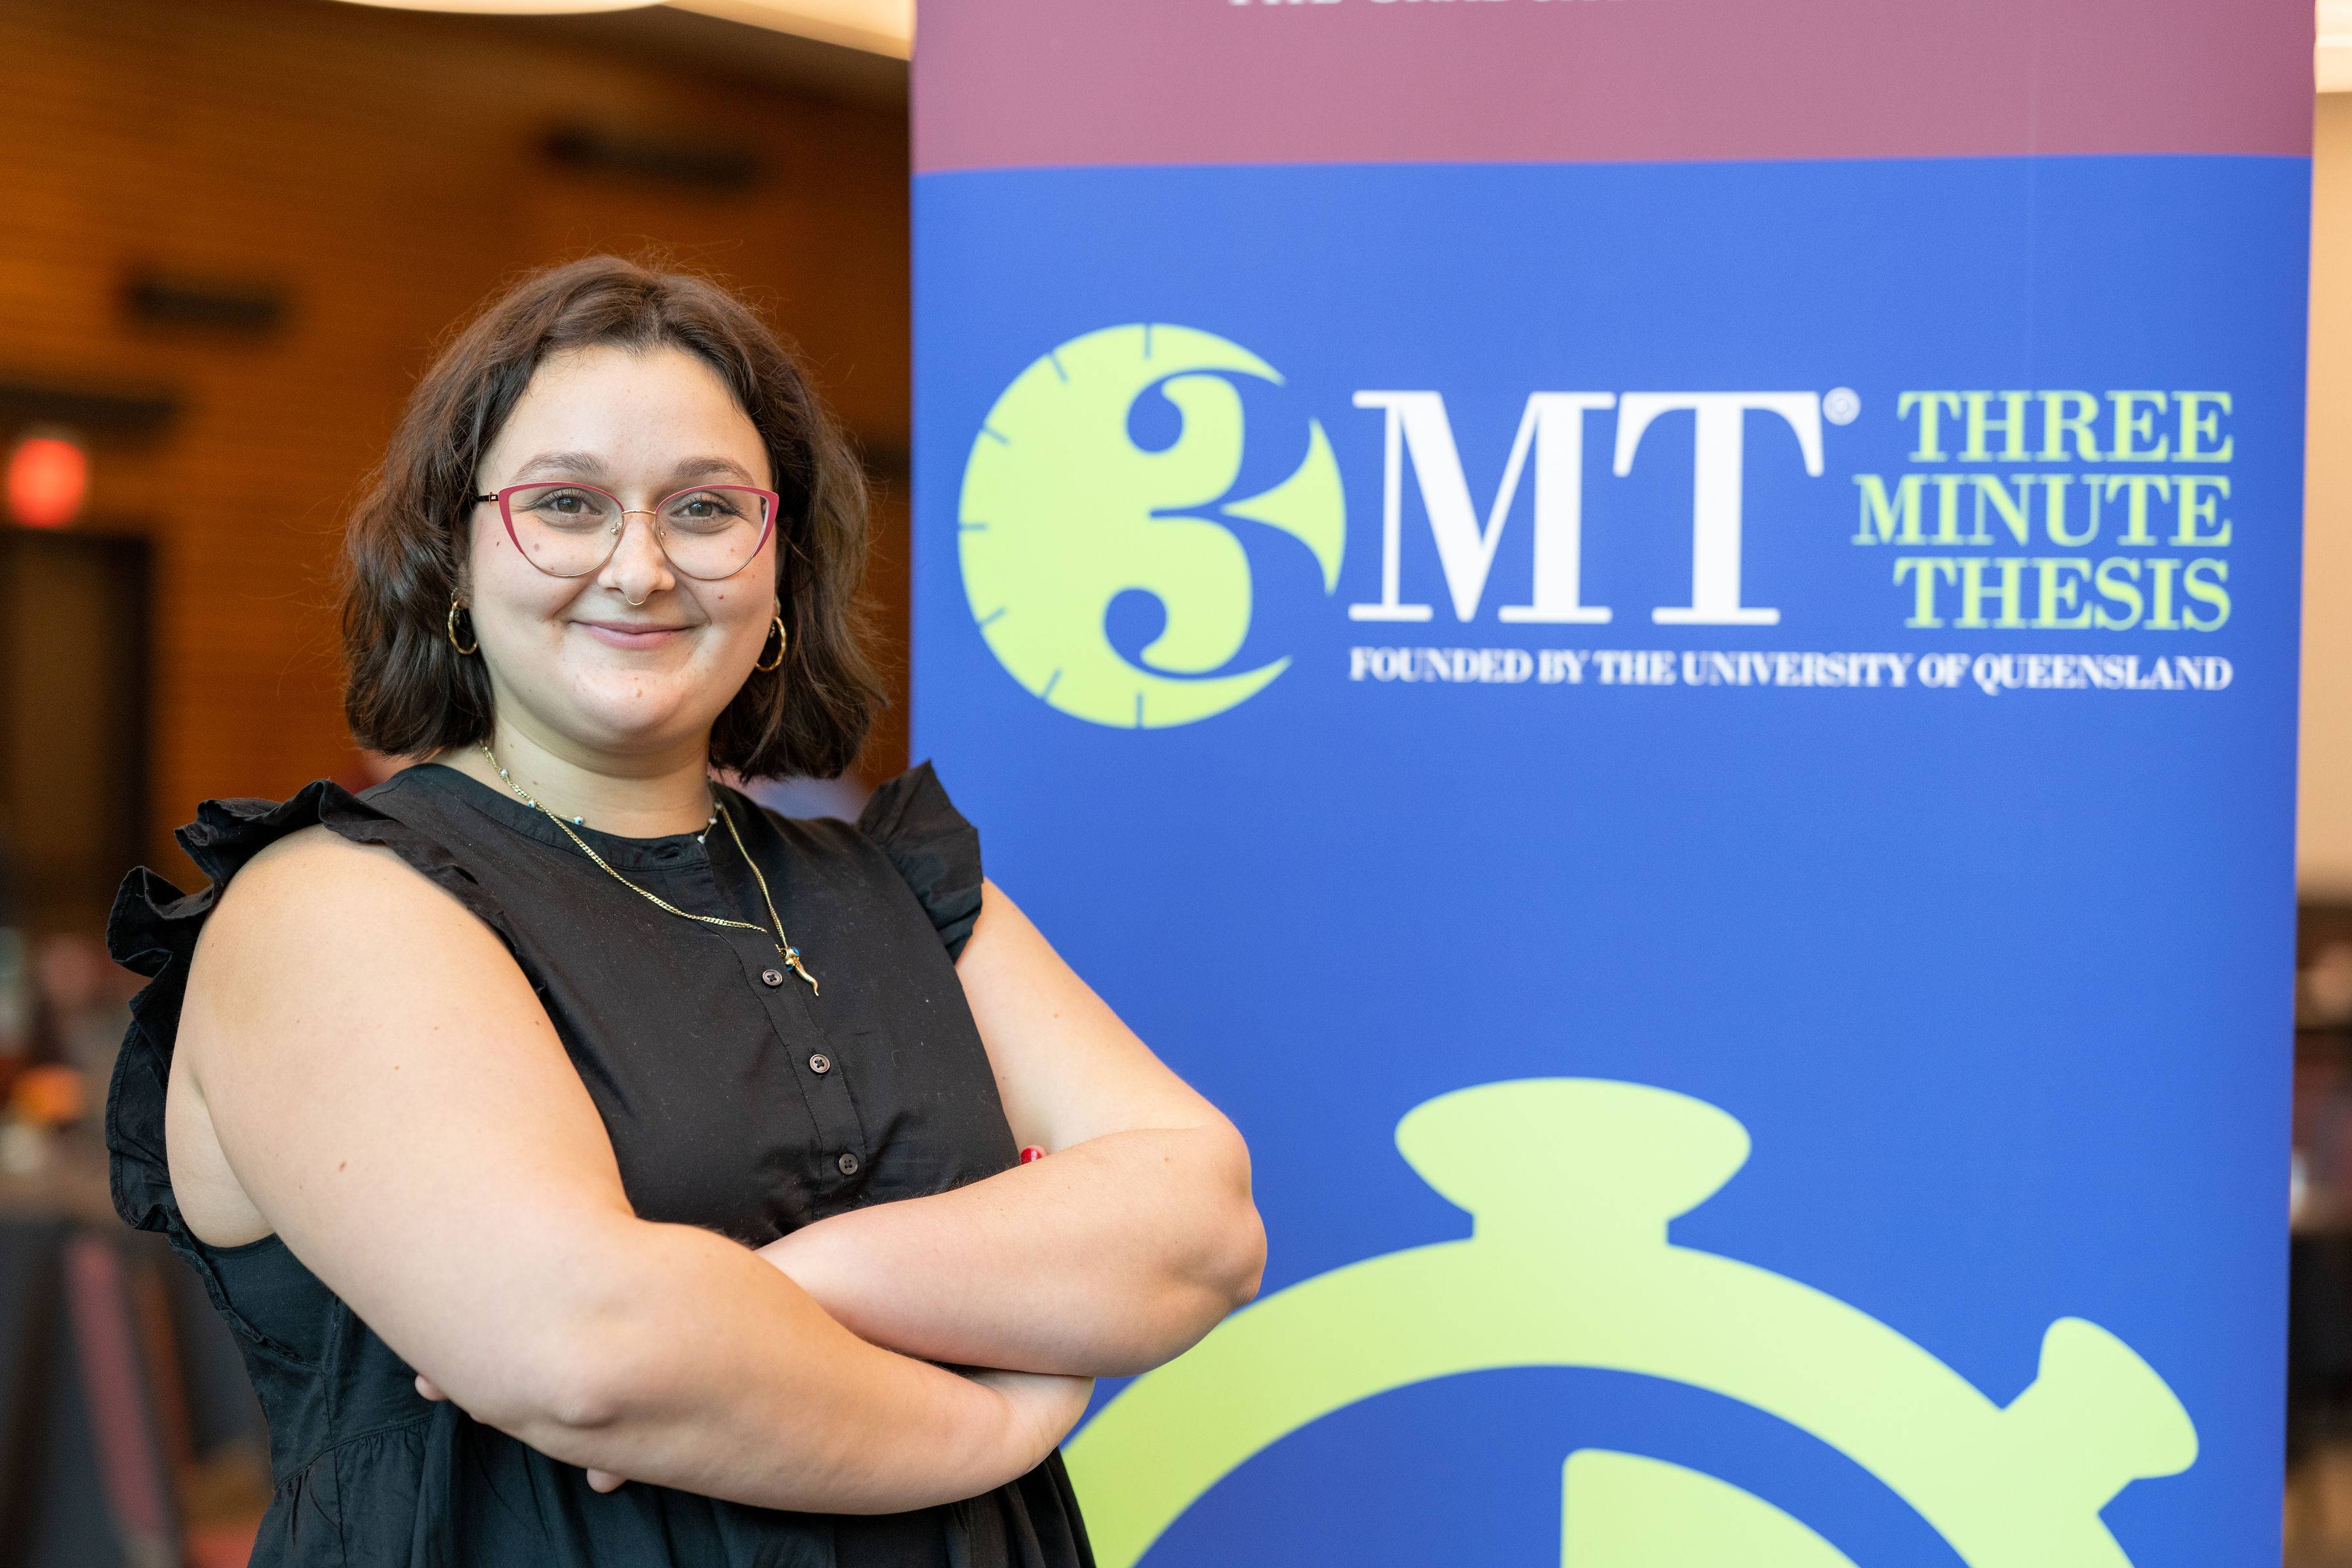 Kayra Tasci standing next to a 3MT sign with her arms crossed